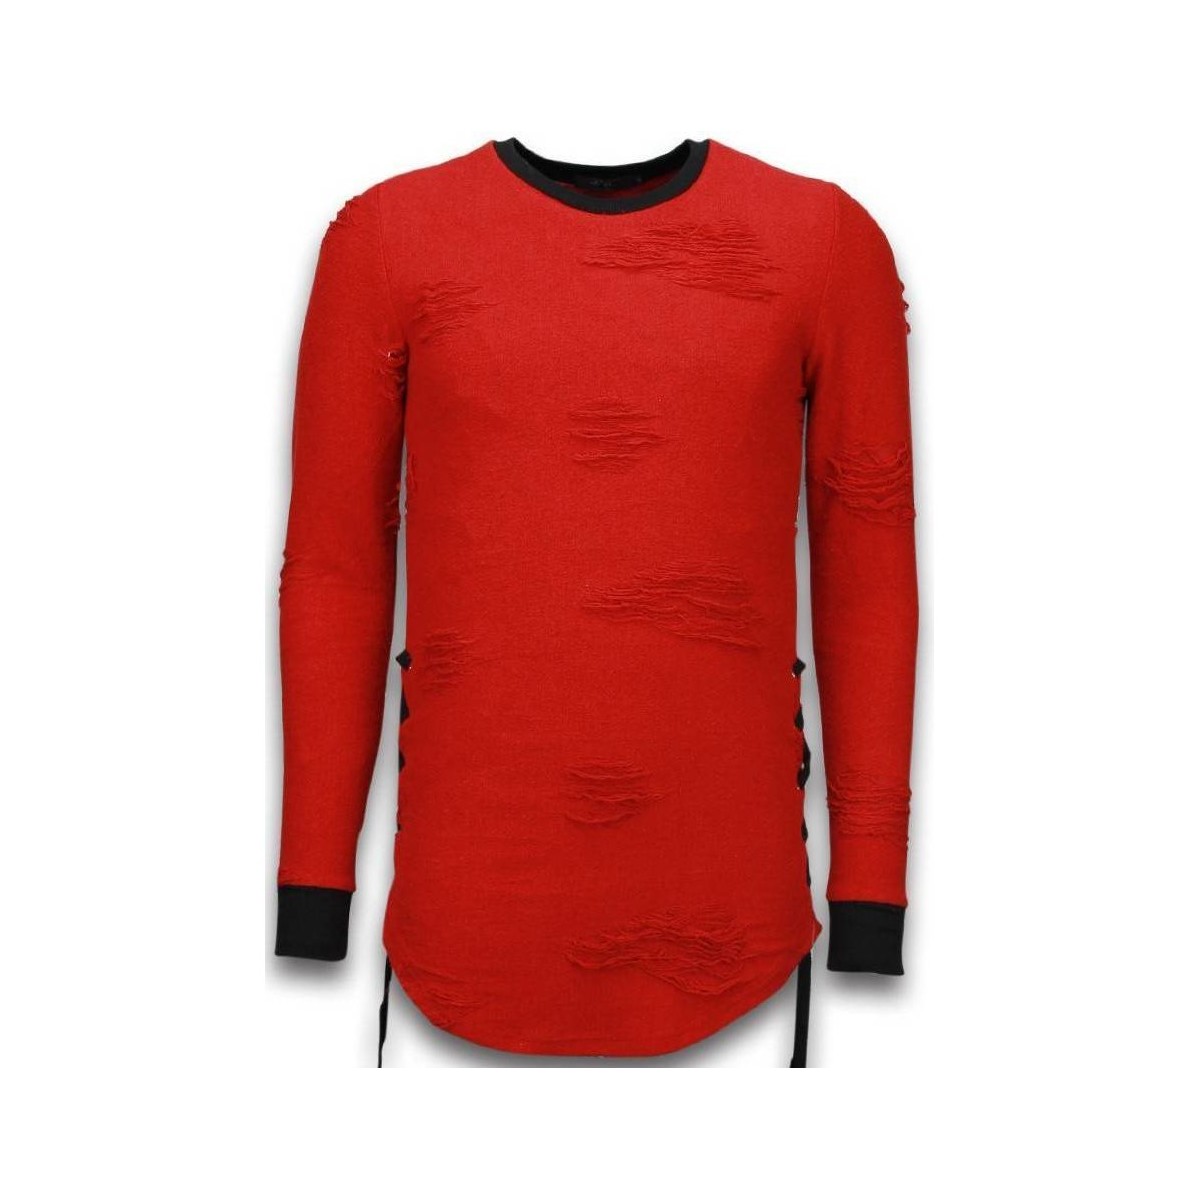 Textiel Heren Sweaters / Sweatshirts Justing Destroyed Look Side Laces Long Fit Rood